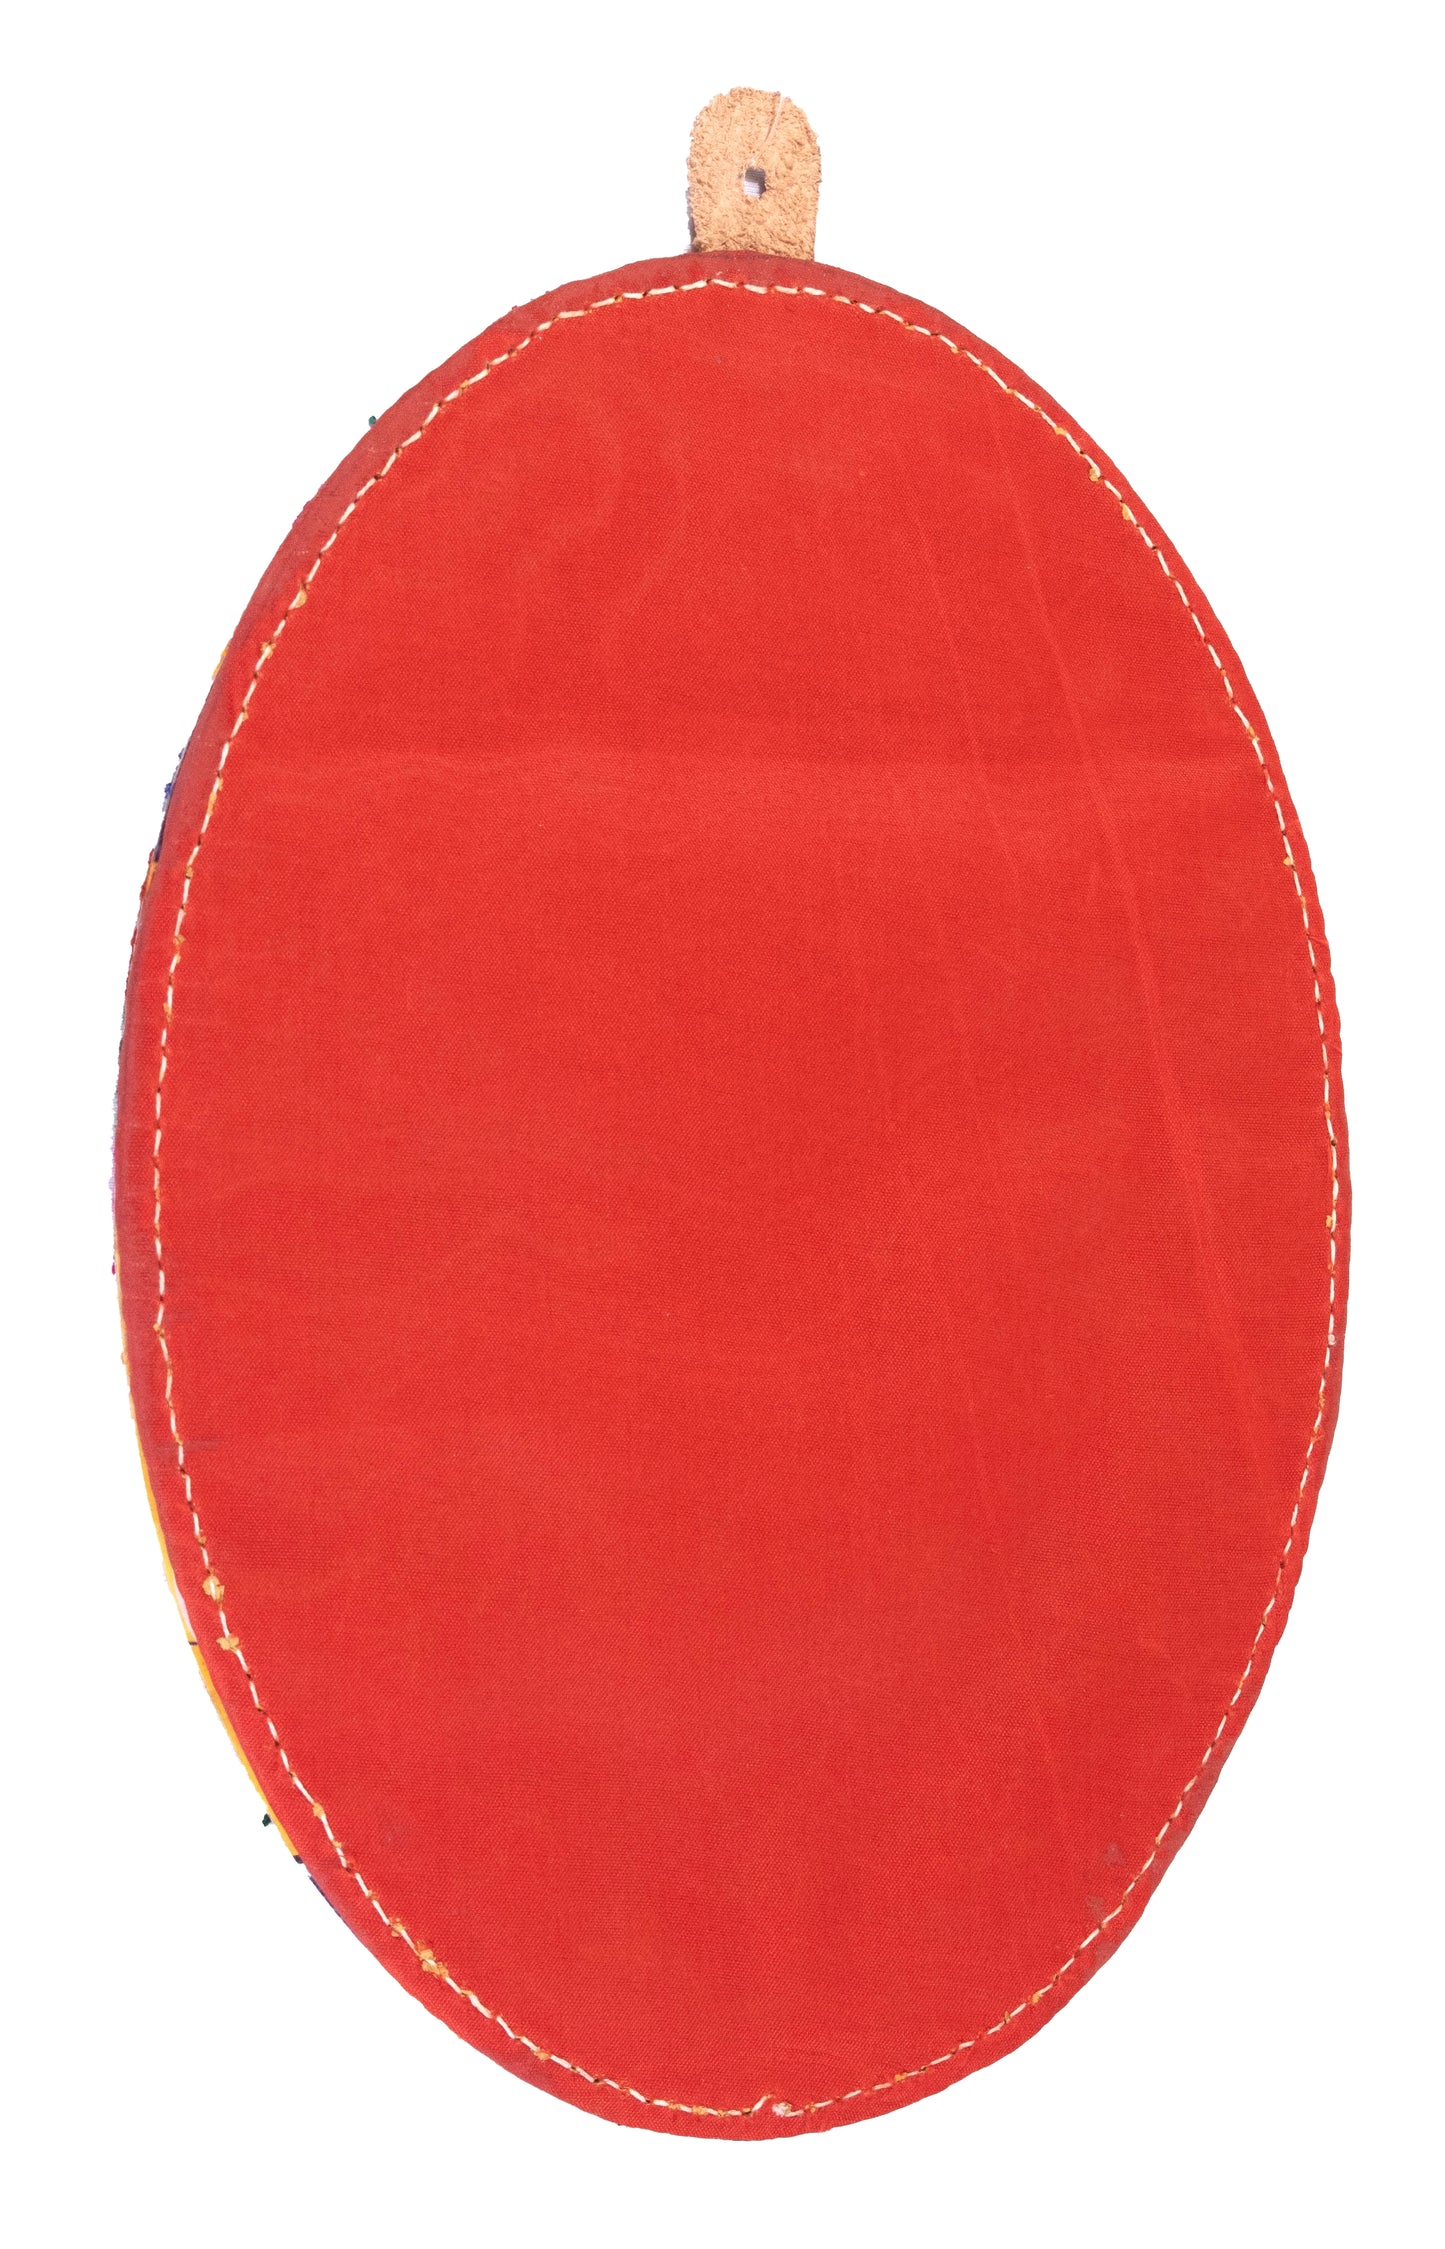 Oval Very Small Mirror Leather Craft    -  SKU: 0025